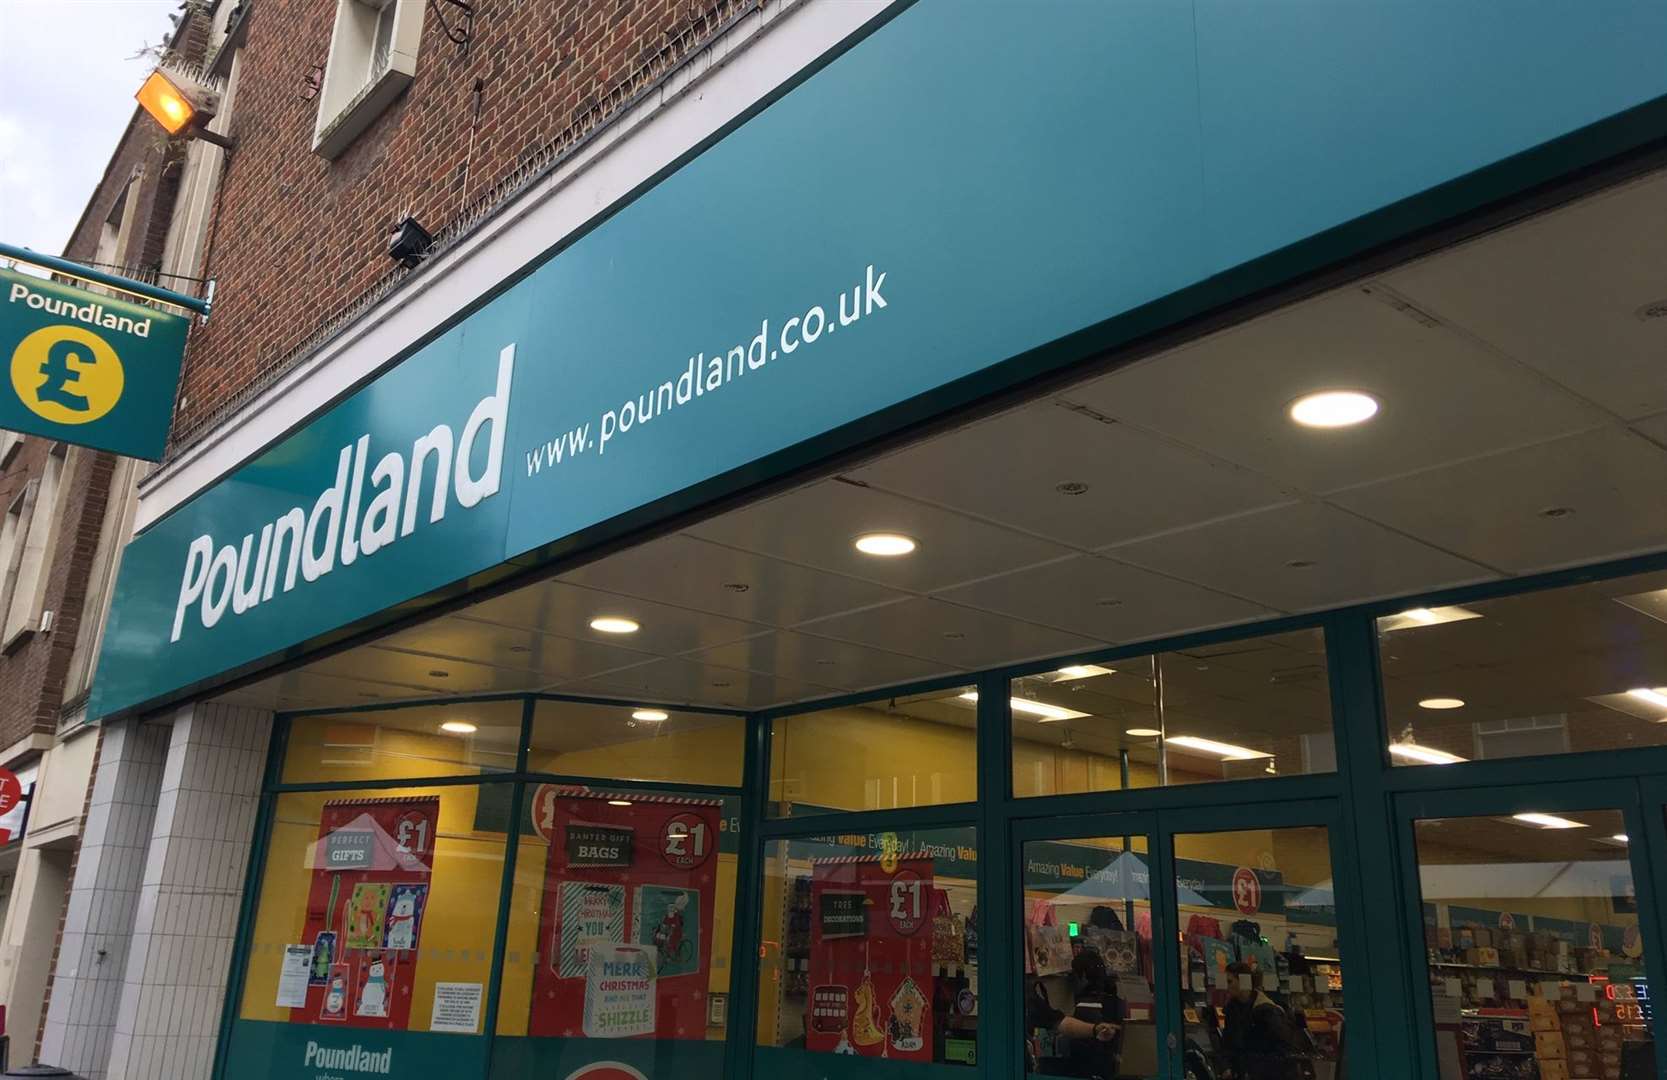 Poundland...all well and good, but it's not quite the same is it?